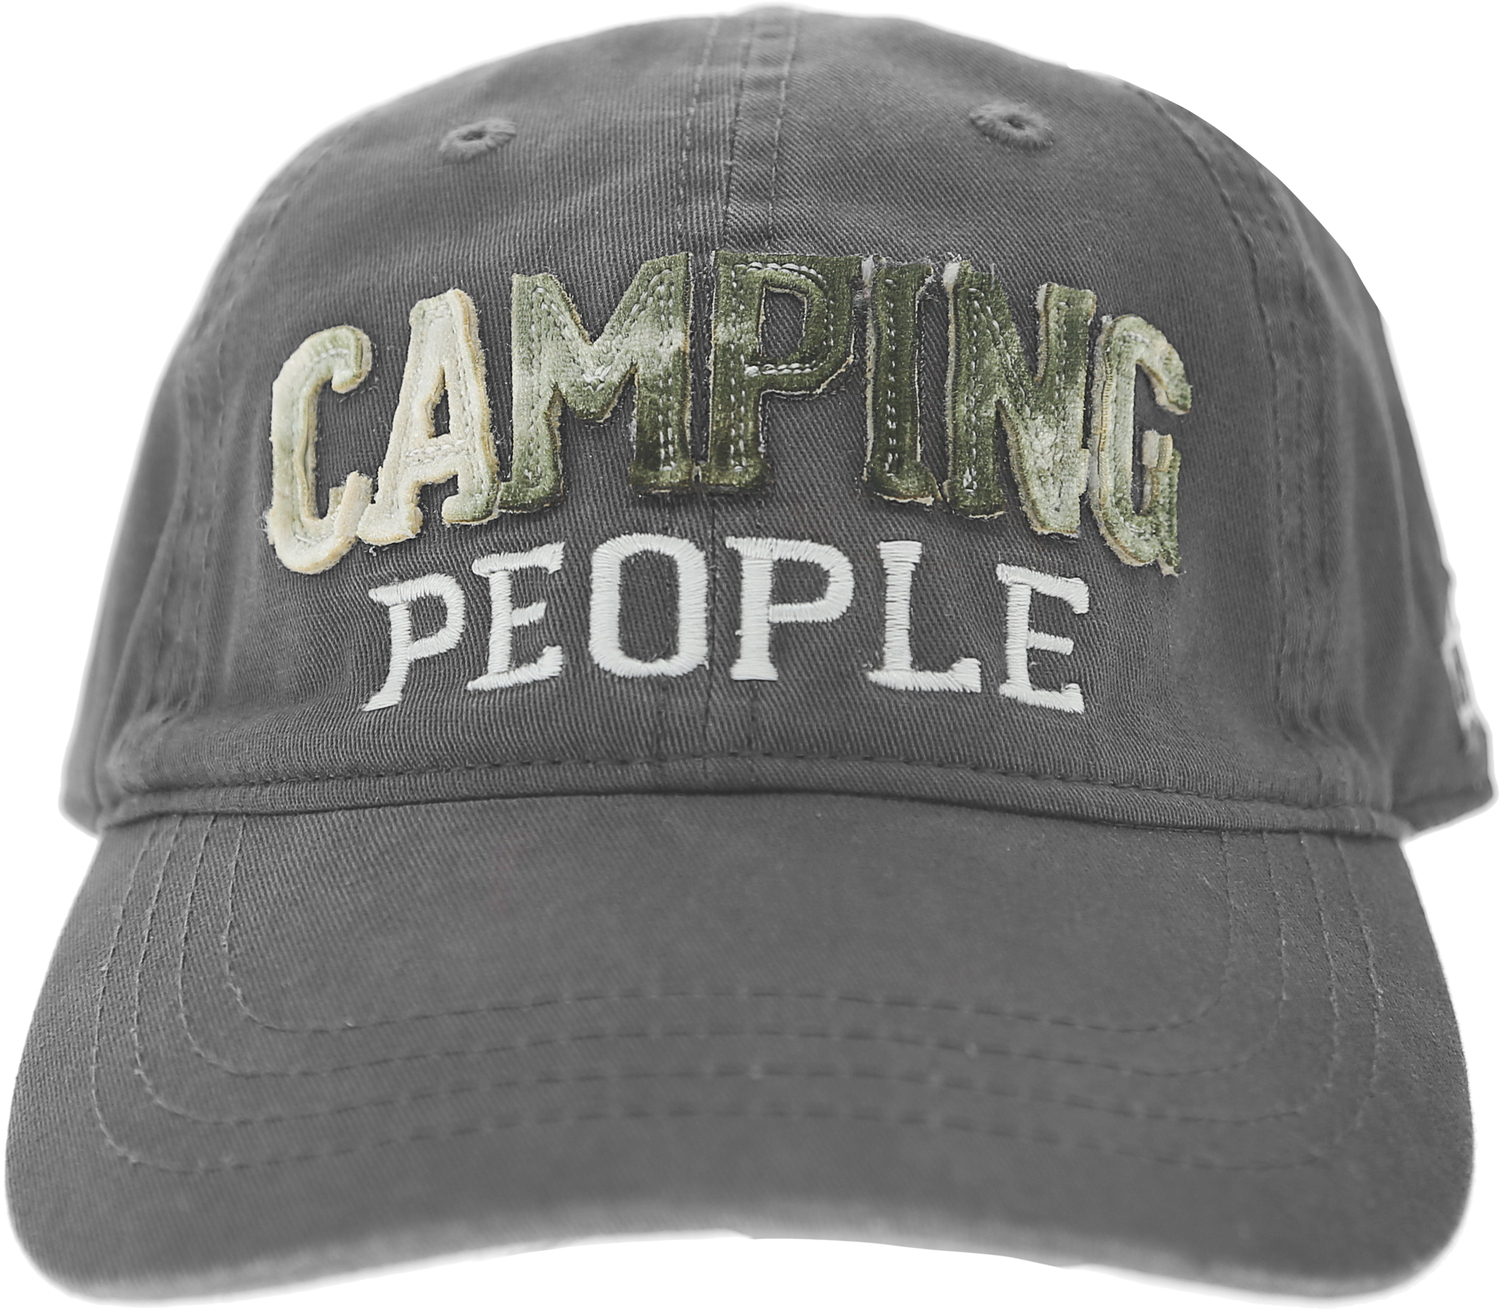 Camping by We People - Camping - Dark Gray Adjustable Hat